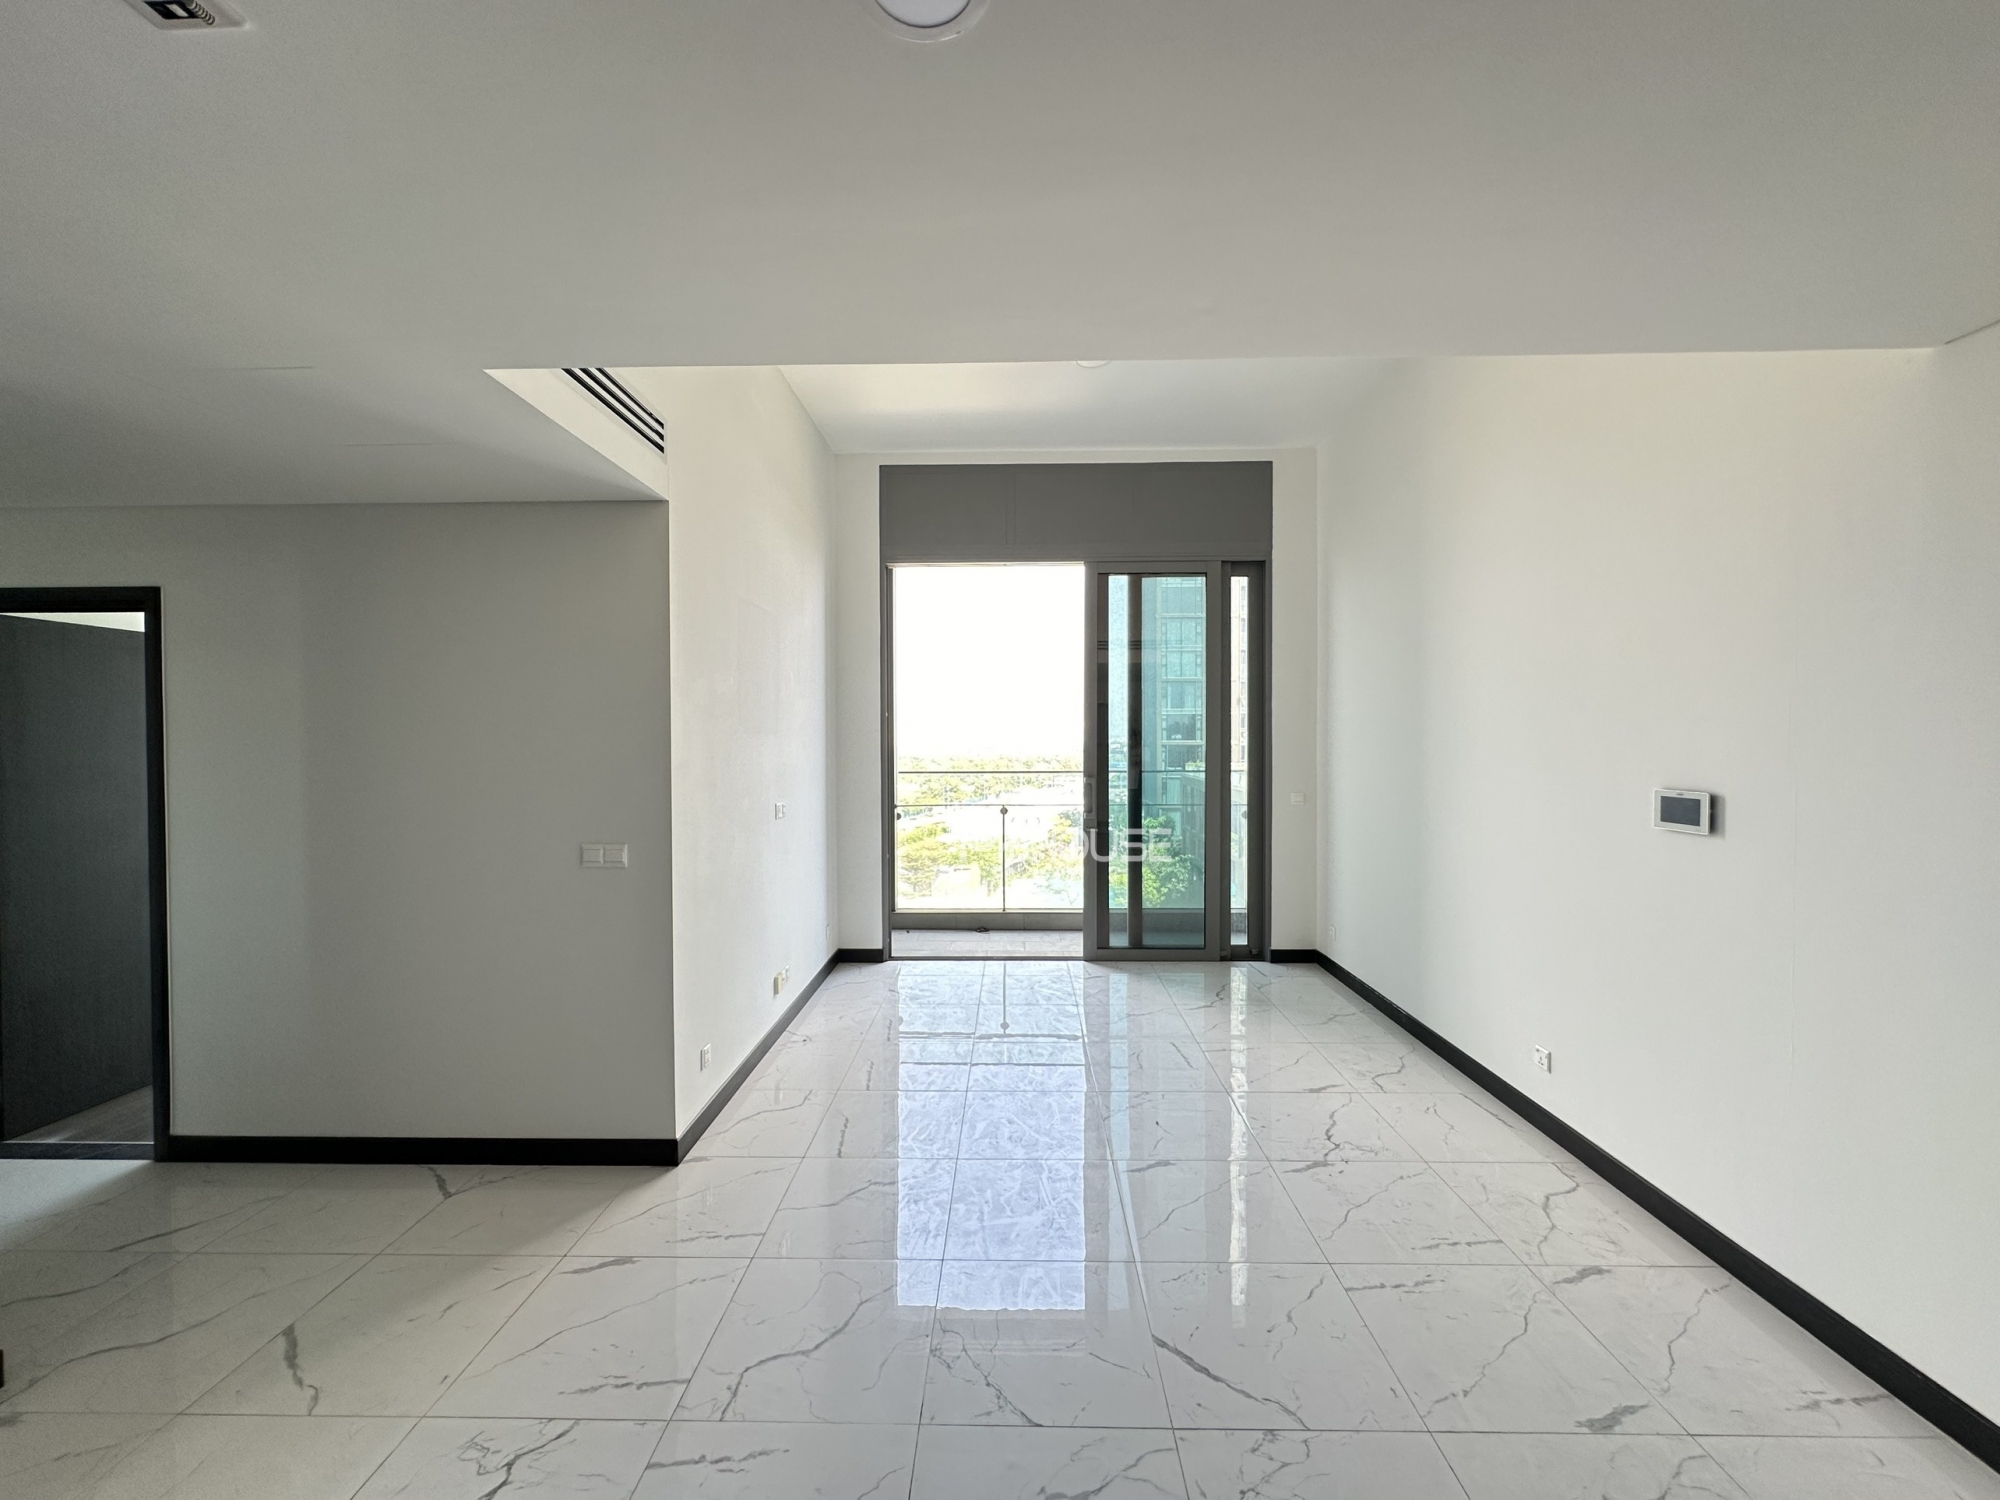 Unfurnished 2-bedroom apartment for rent in Empire City with open view